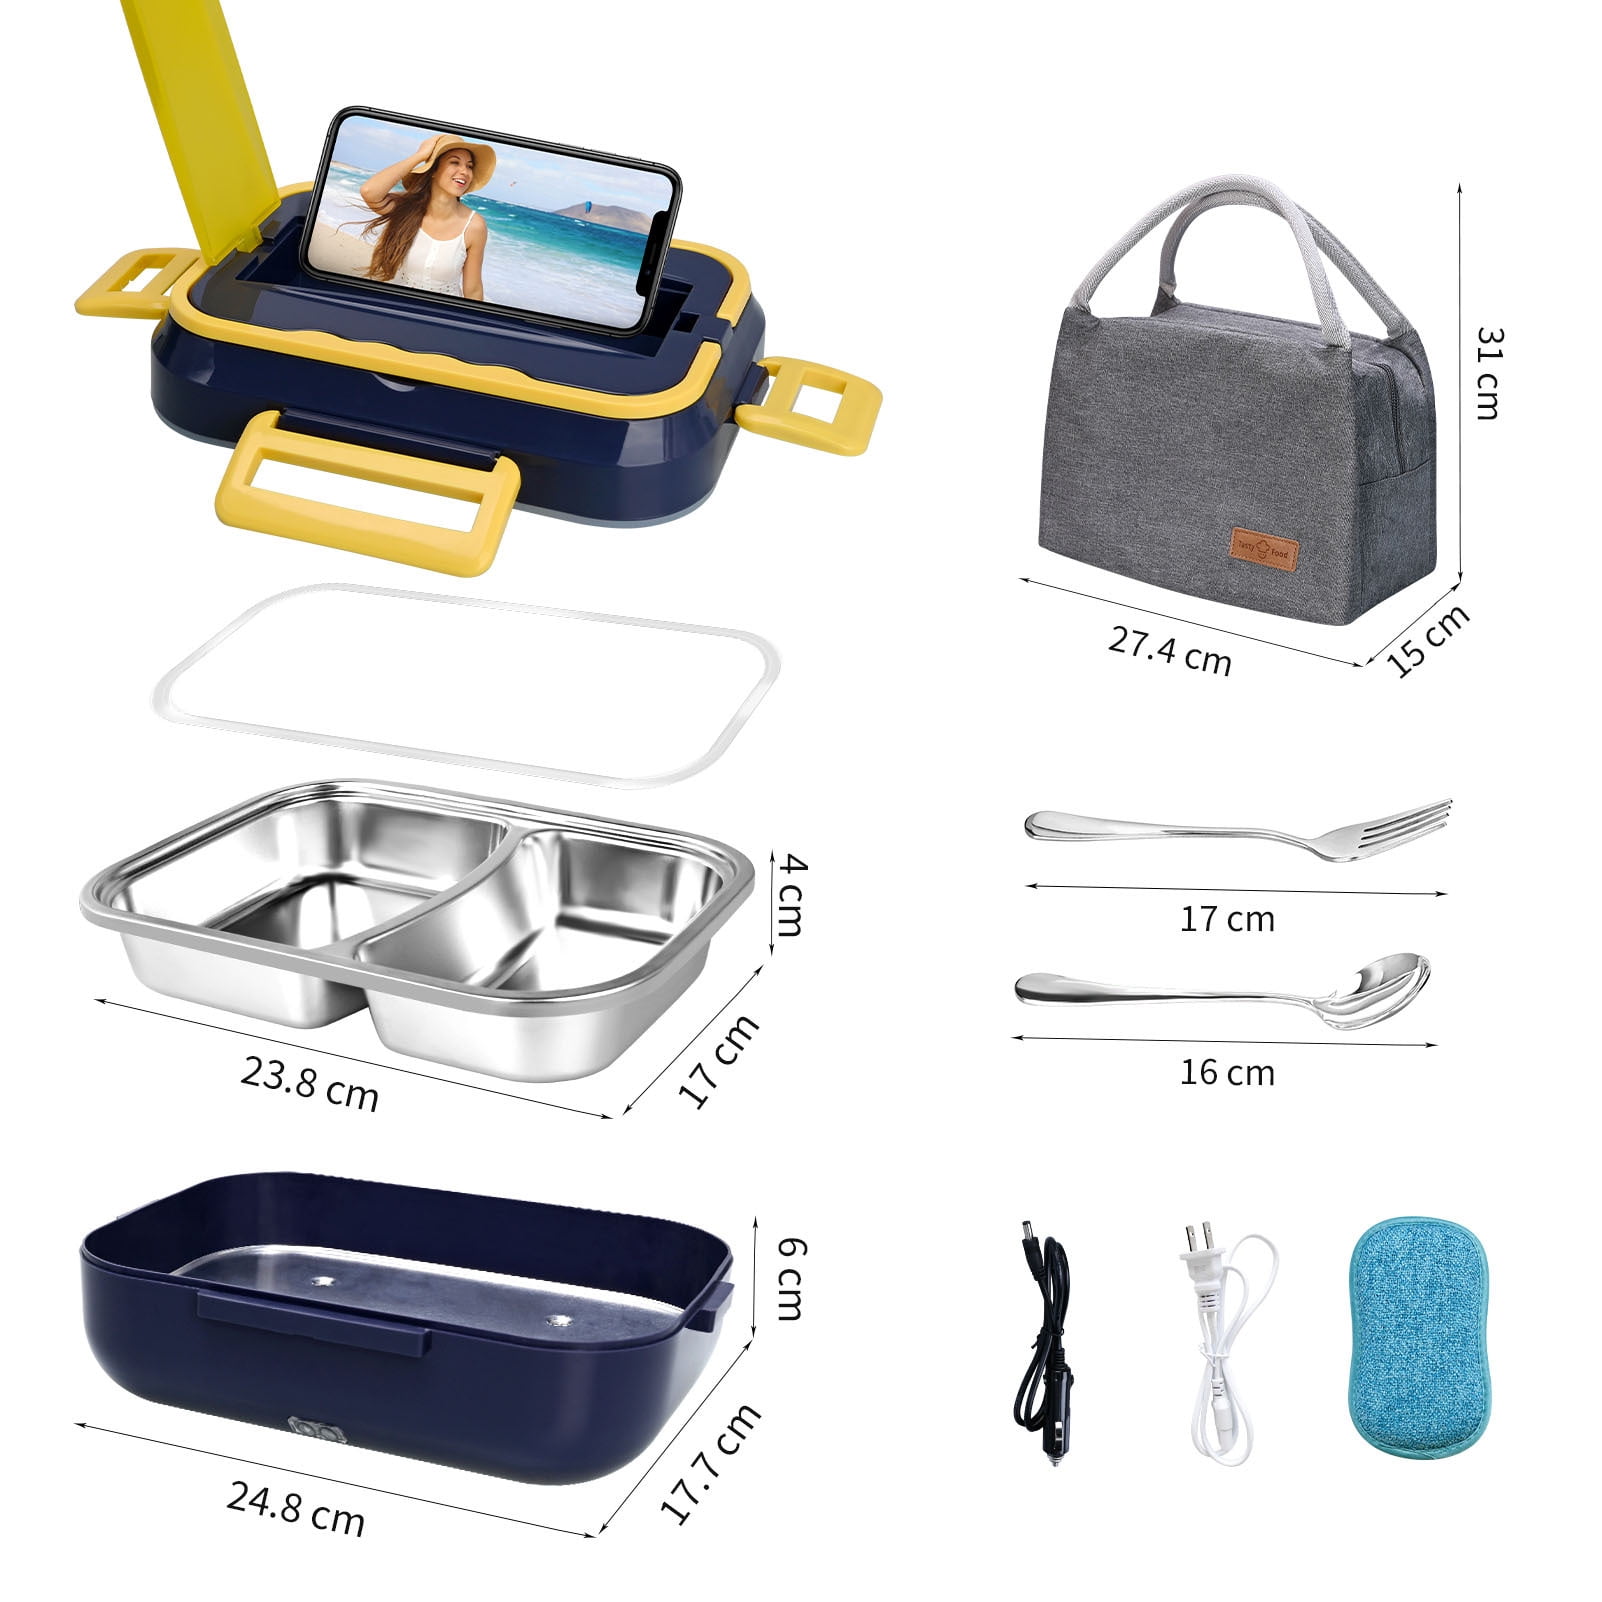 Aynaxcol Electric Lunch Box with Fork Spoon & Bag, 3 in 1 Portable